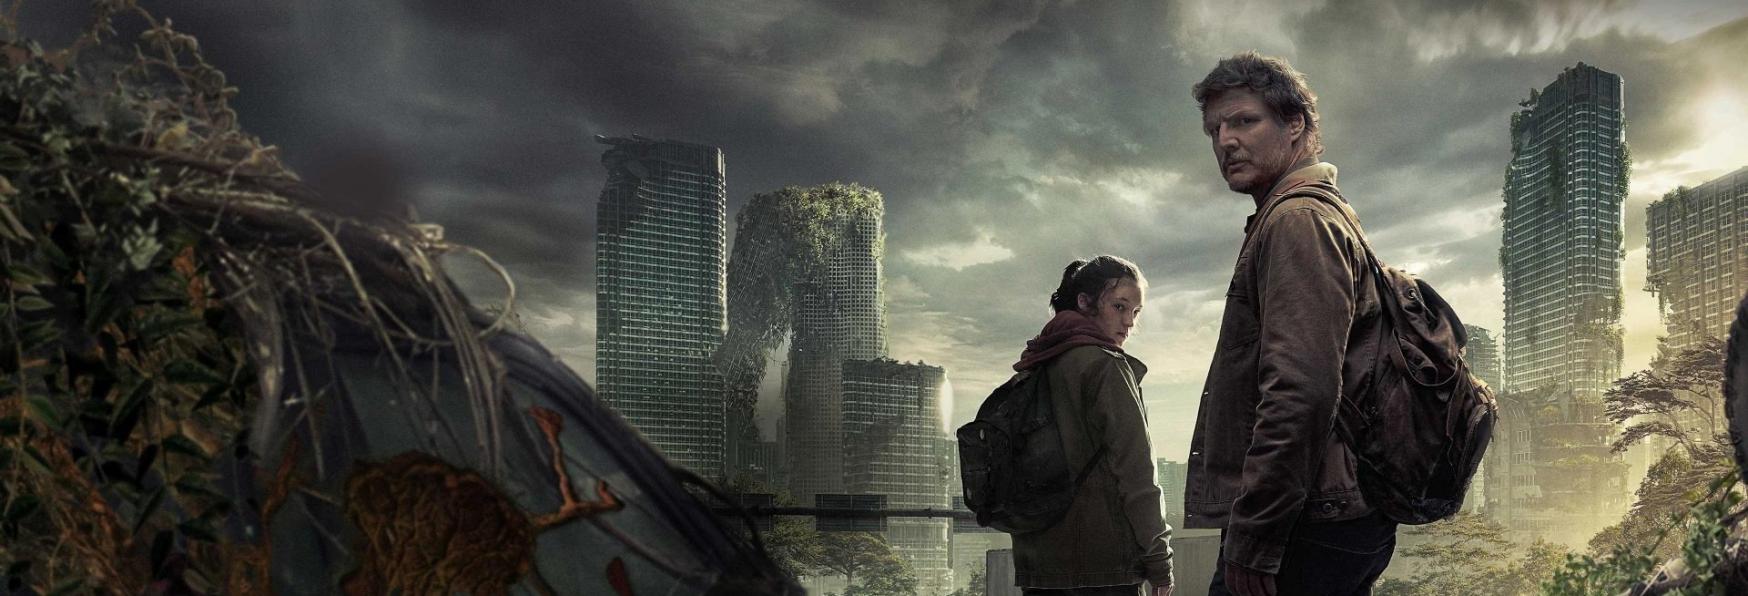 The Last of Us 2: the new Season will be filmed in Vancouver